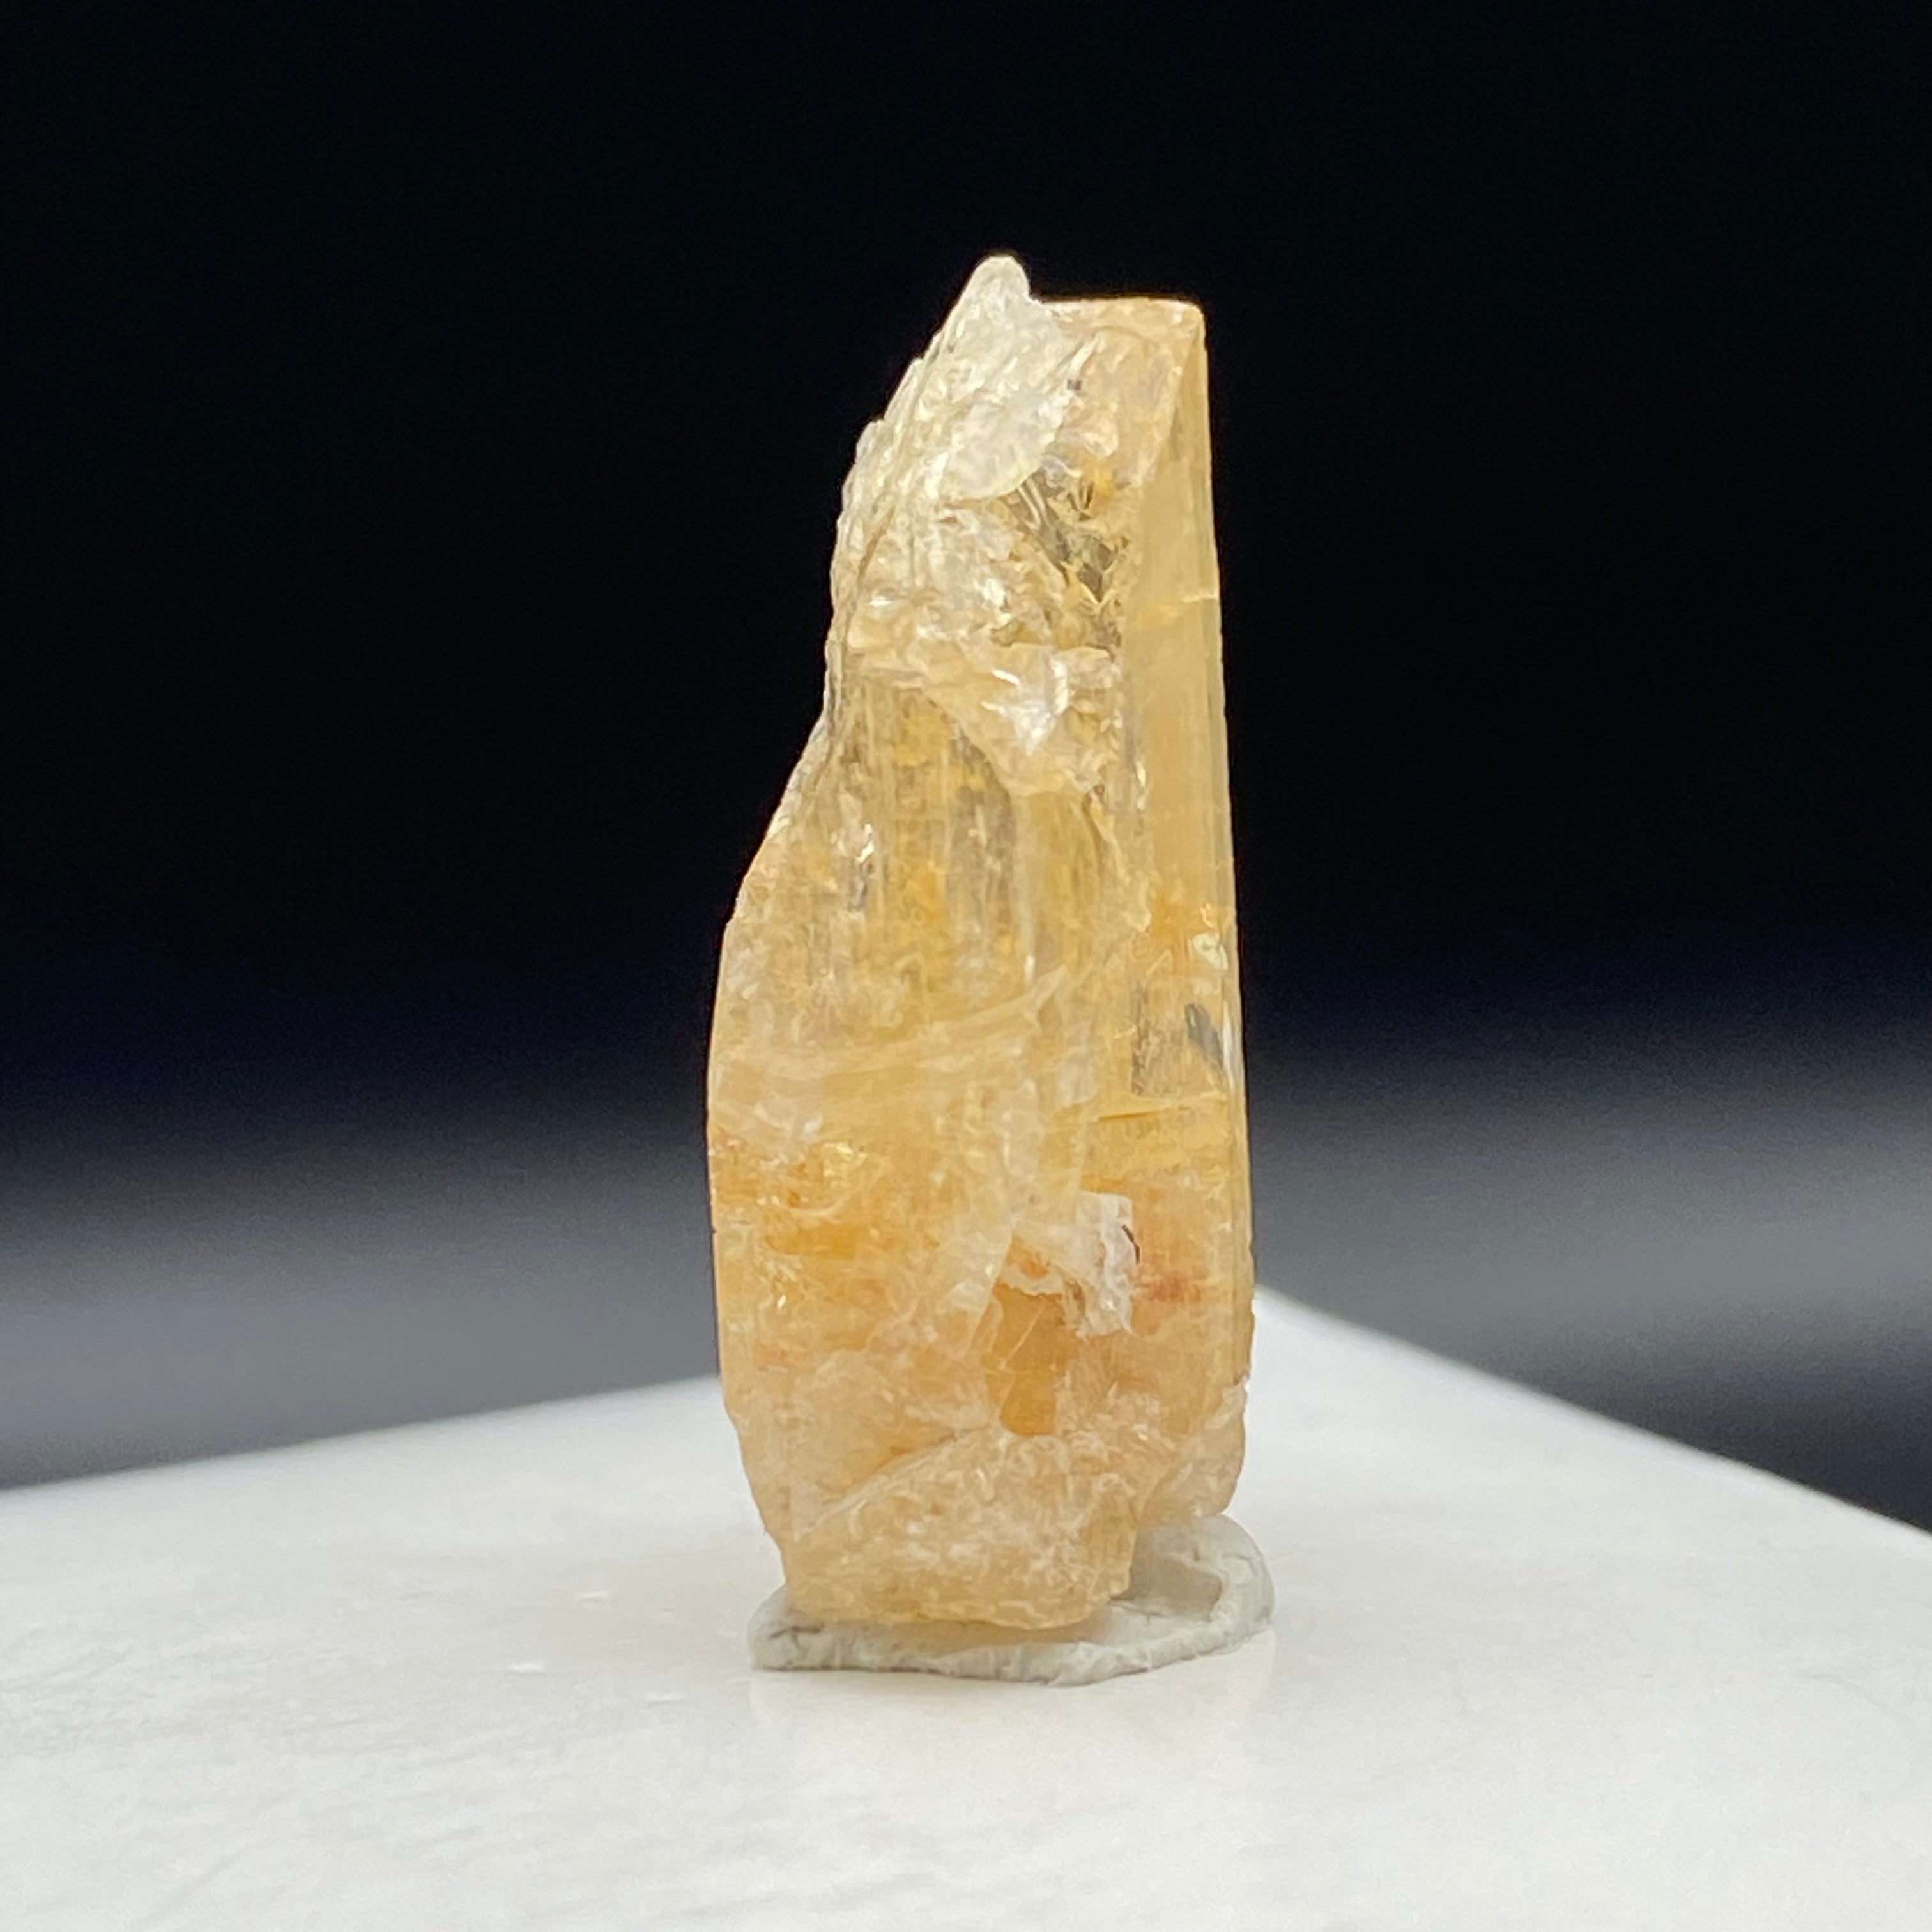 Imperial Topaz Non-Terminated Crystal - 138